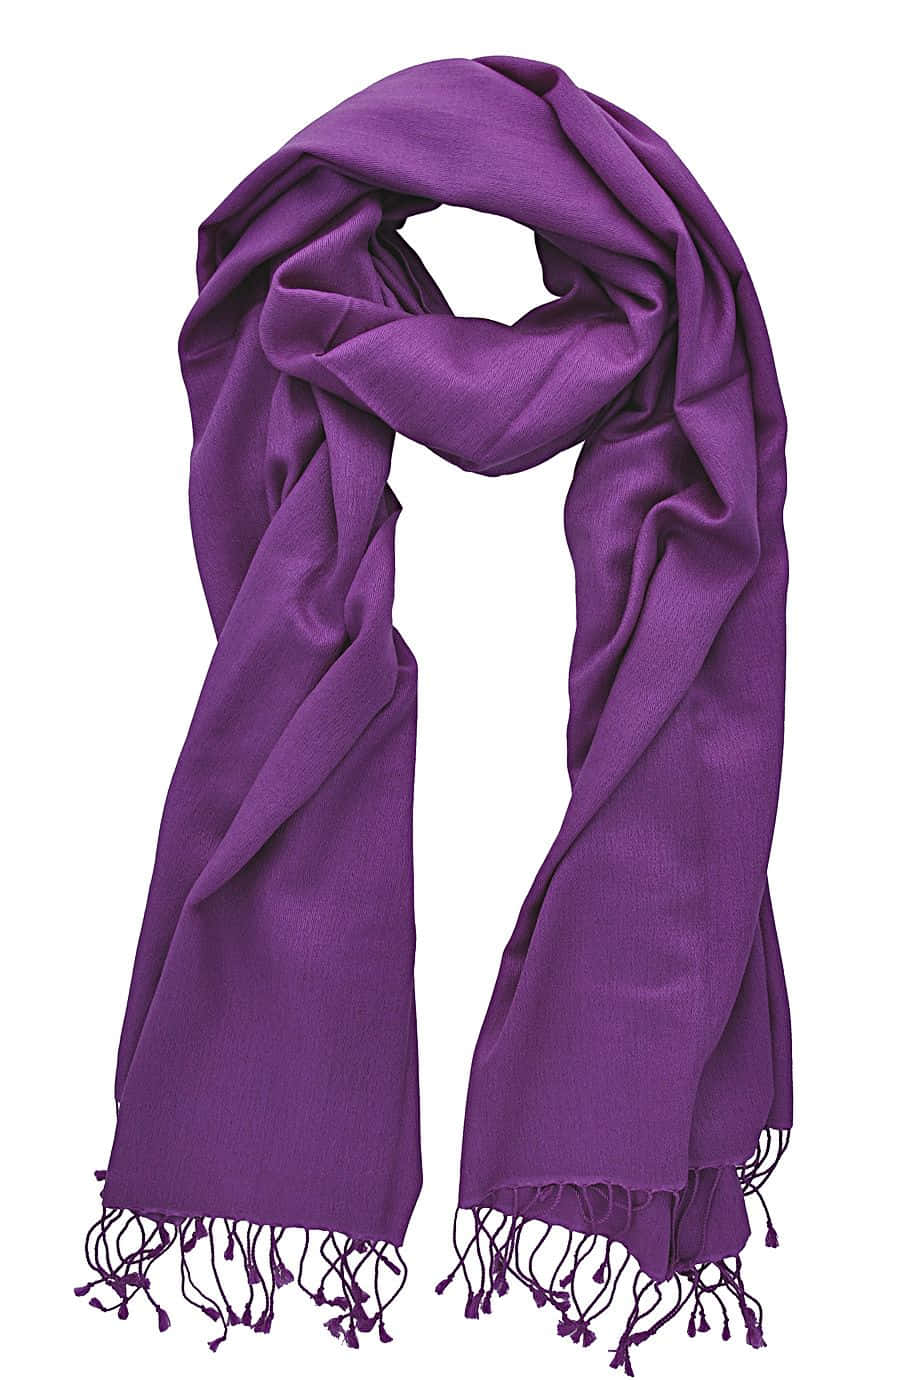 Download It's time to upgrade your style with this classic purple scarf ...